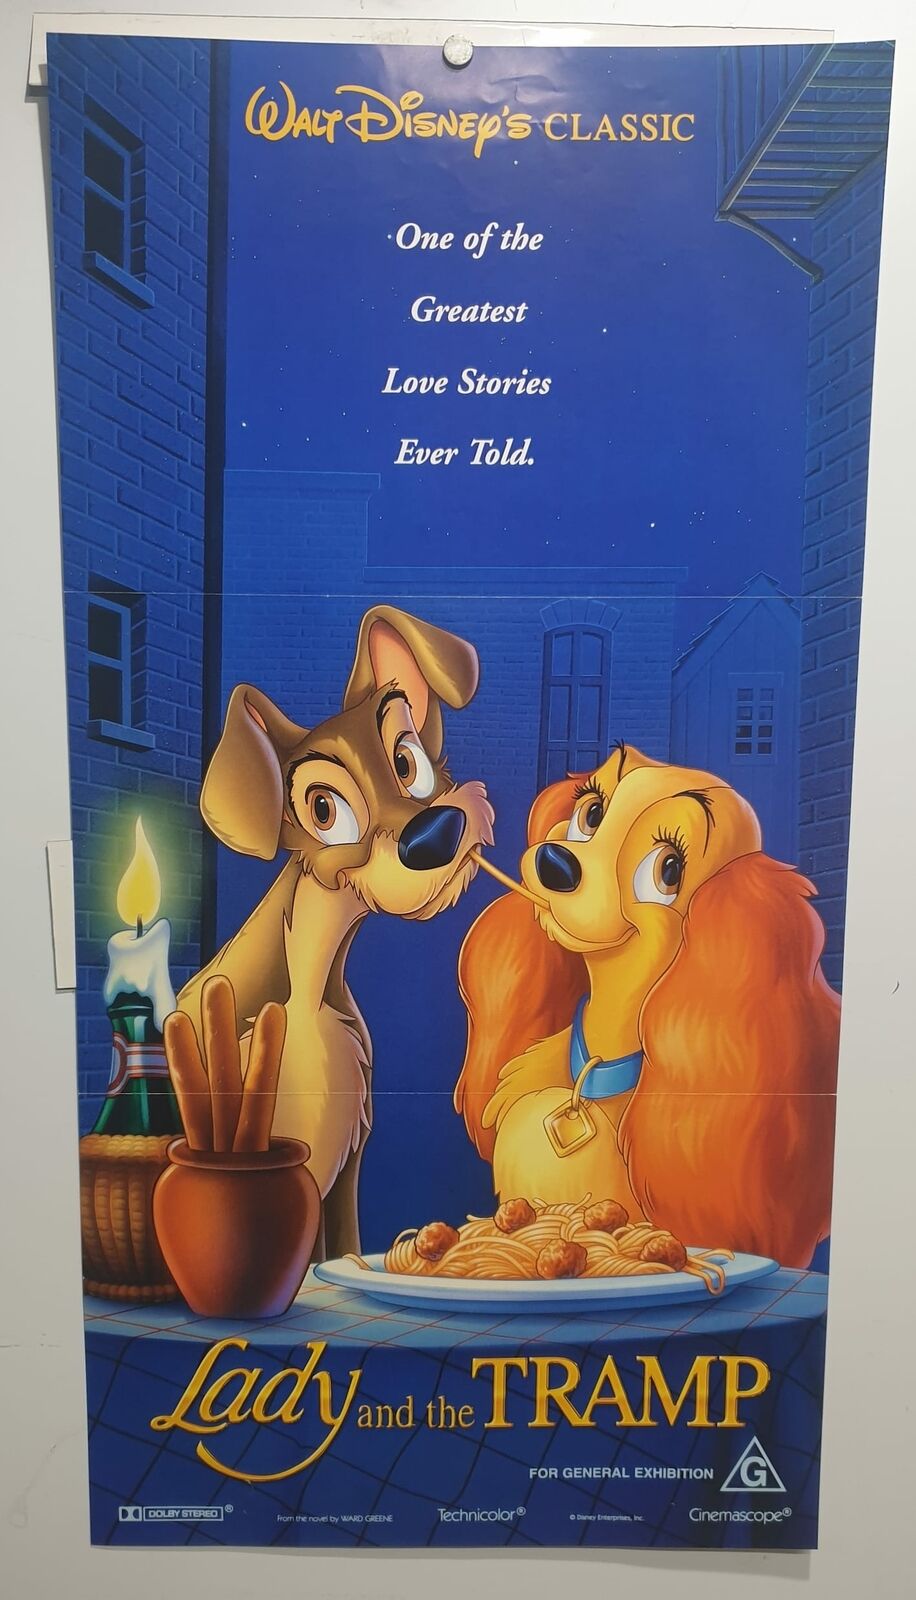 ORIGINAL DAYBILL MOVIE POSTER - LADY AND THE TRAMP - A walt Disney Production